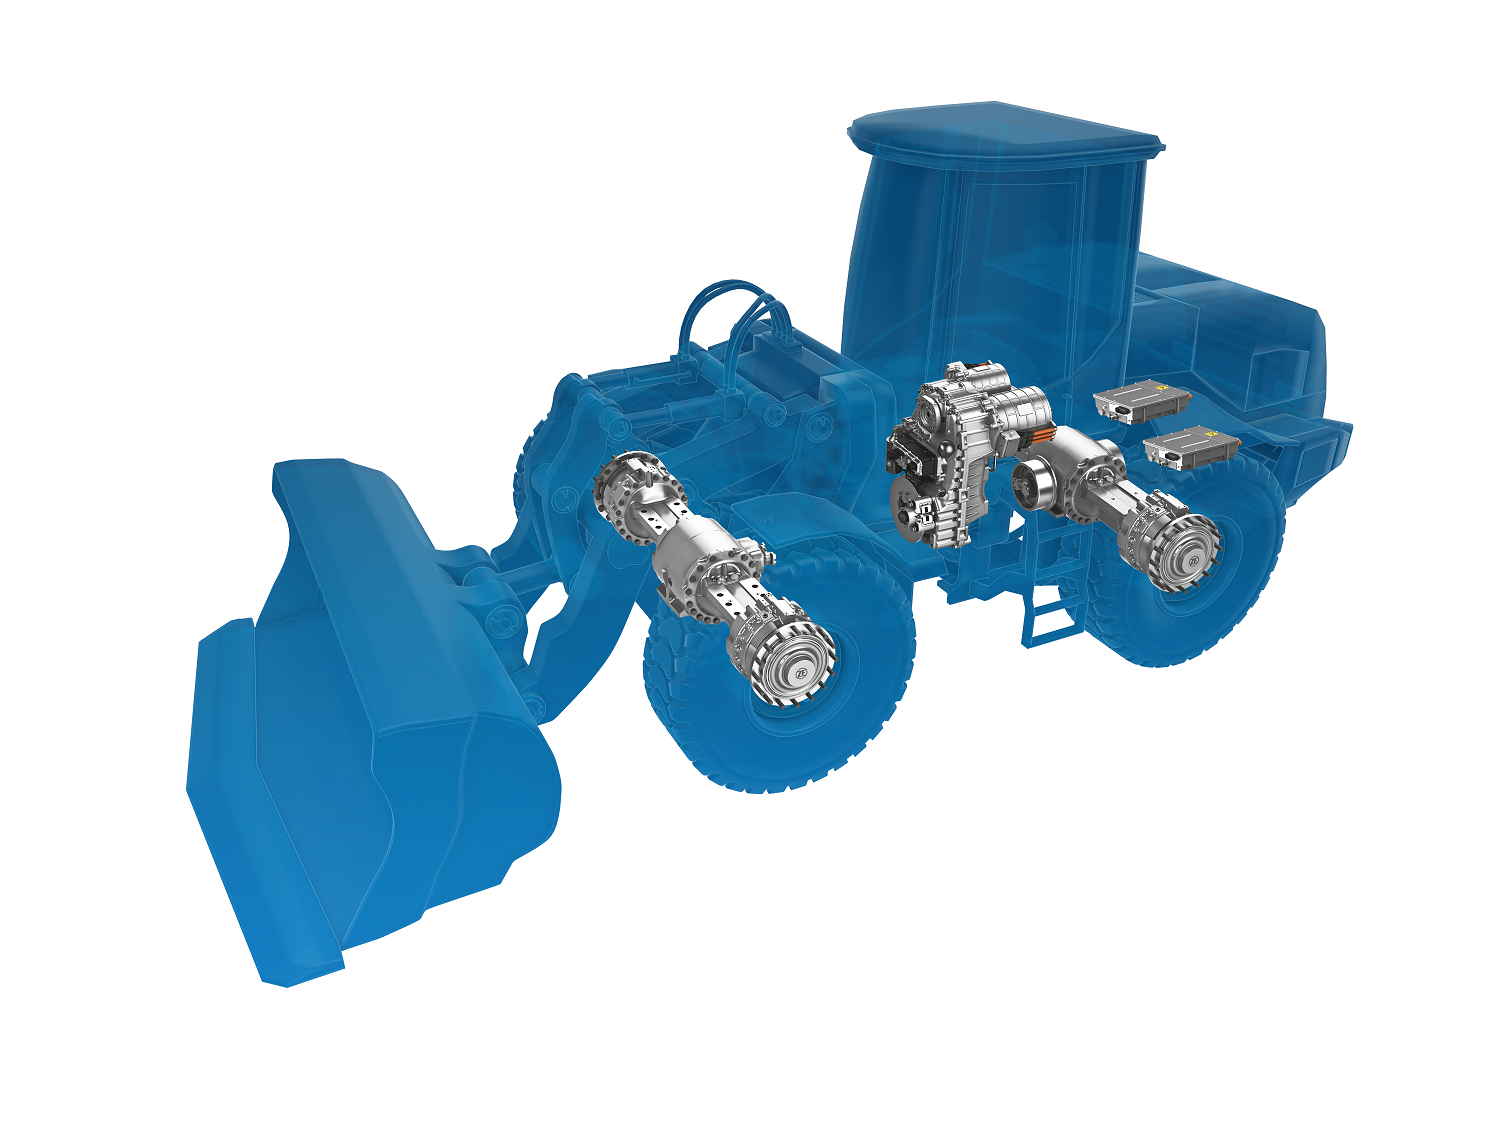 The ZF eTRAC drive system enables emission-free operation of medium-sized wheeled loaders